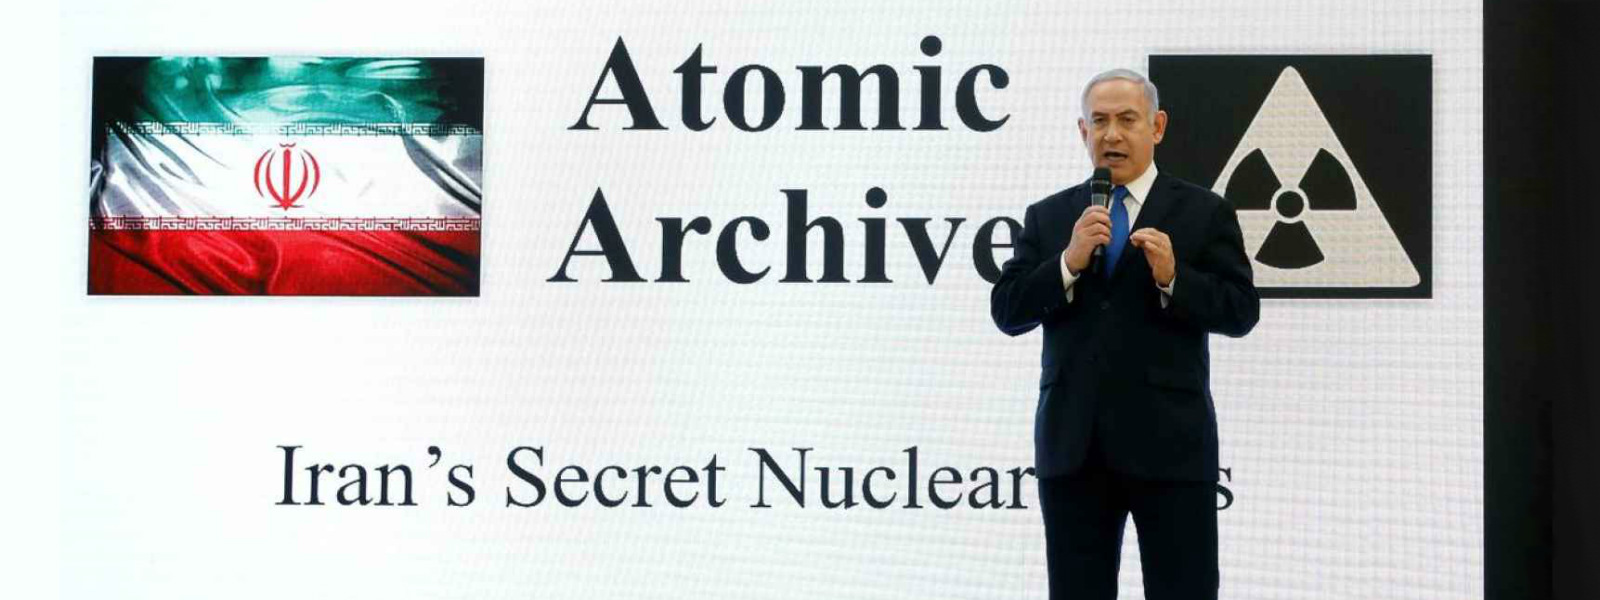 US says Iran nuclear deal was "built on lies"